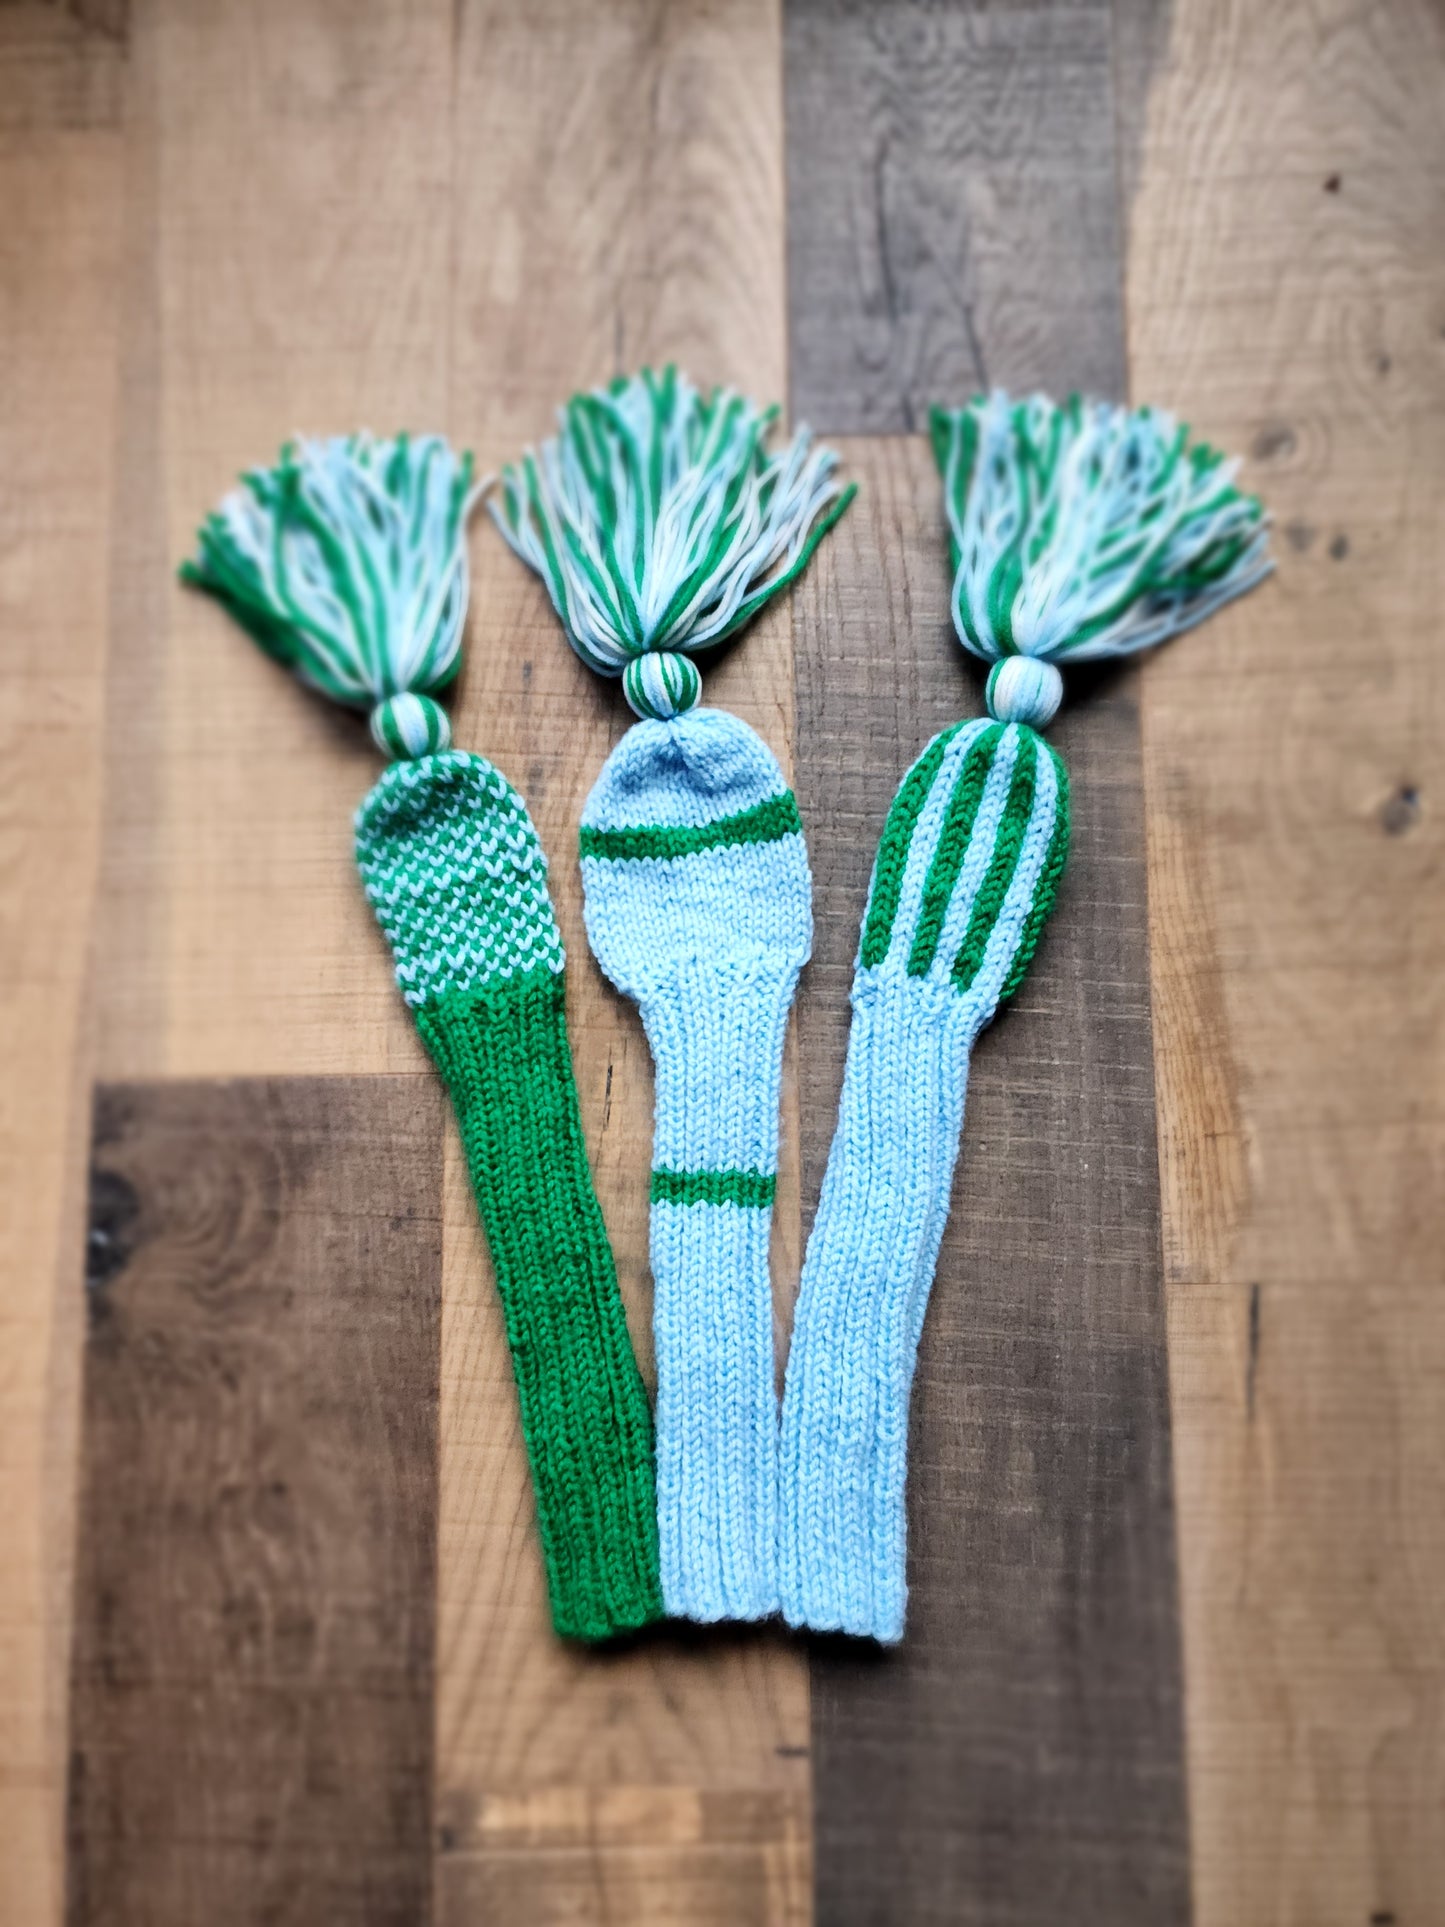 Three Golf Club Head Covers Retro-Vintage Blue, Green & White with Tassels for Drivers, Woods - Austinknittylimits